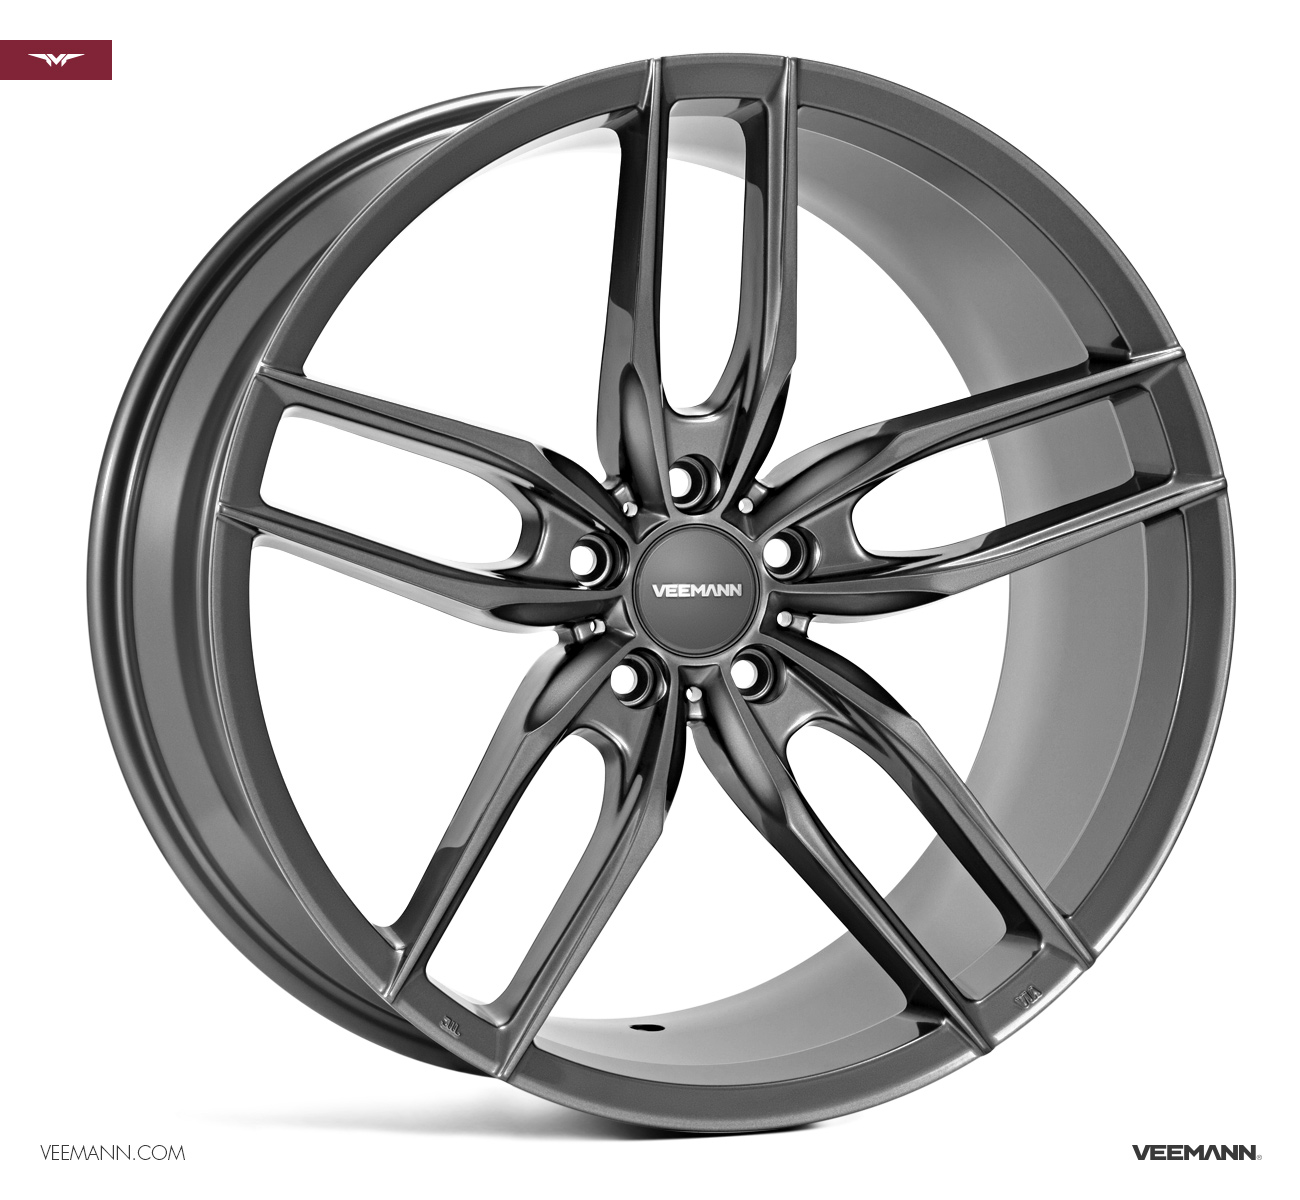 NEW 20" VEEMANN V-FS28 ALLOY WHEELS IN GLOSS GRAPHITE WITH DEEPER CONCAVE 10" REARS